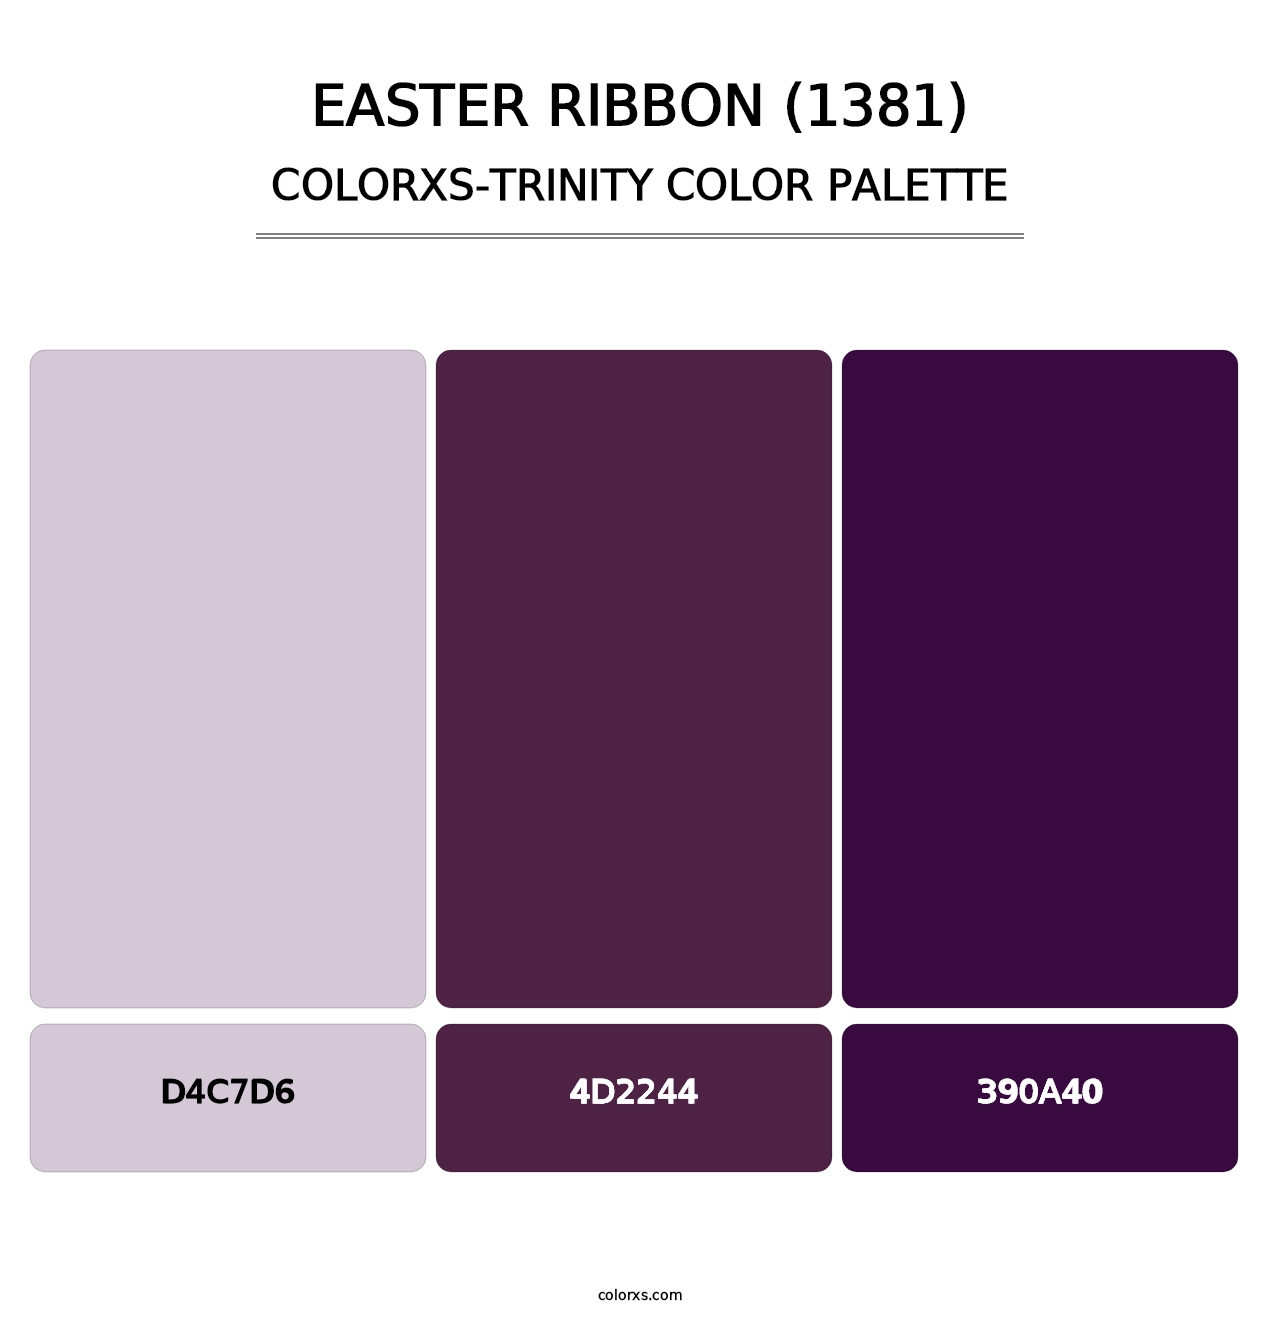 Easter Ribbon (1381) - Colorxs Trinity Palette